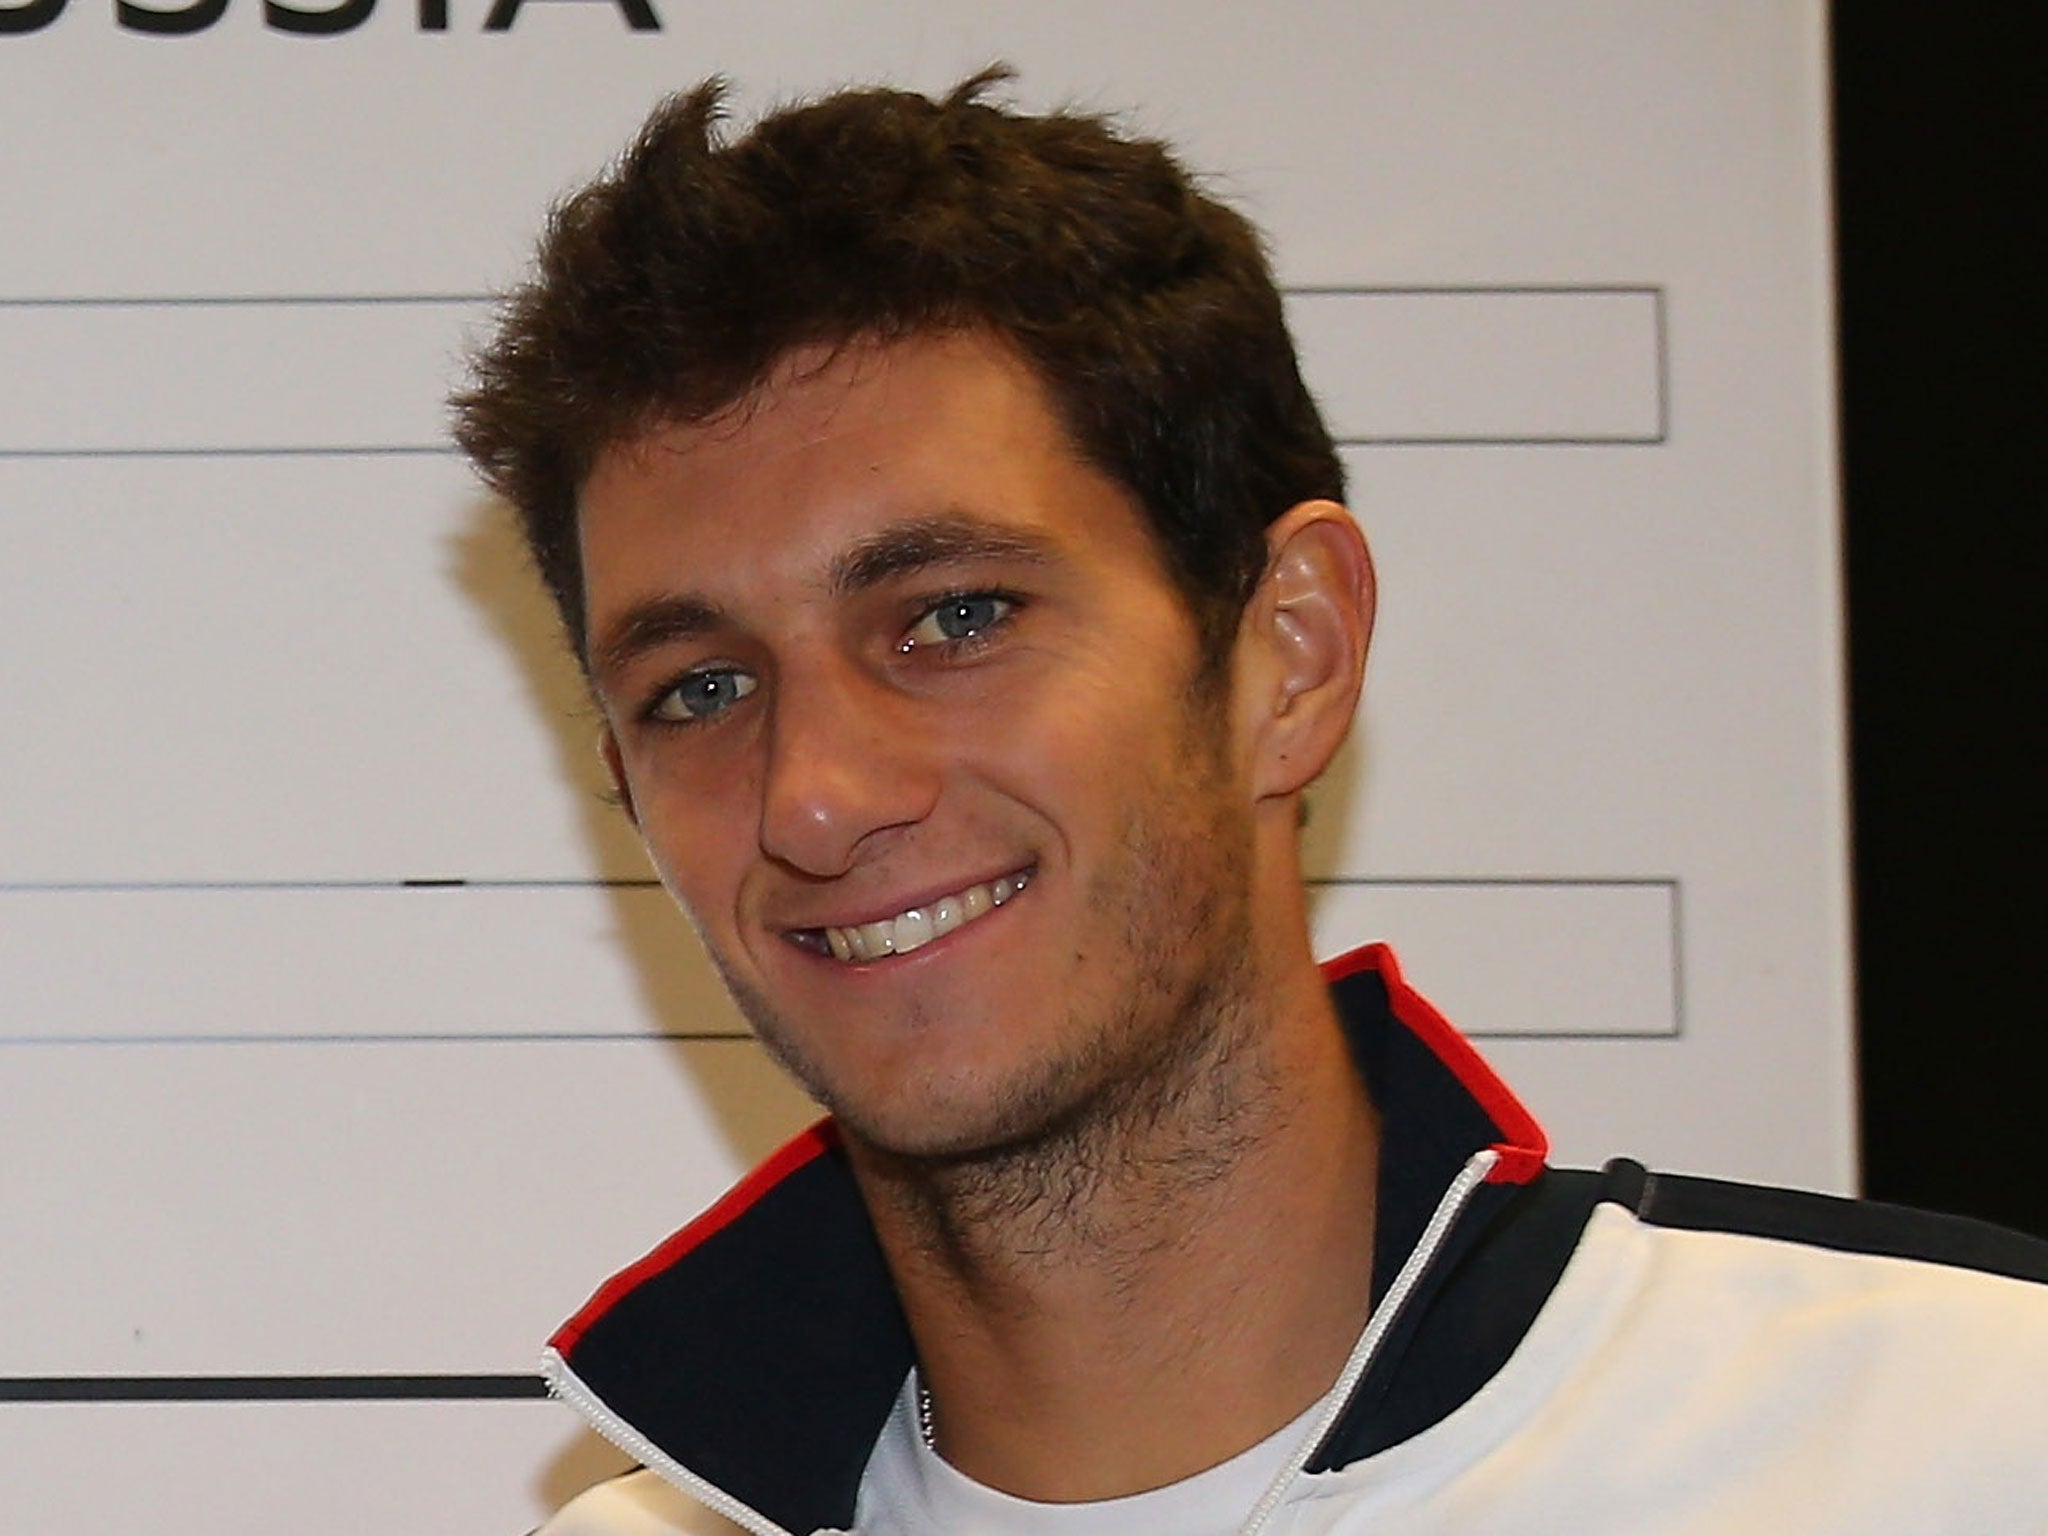 James Ward (No 214) will be Britain’s lead singles player